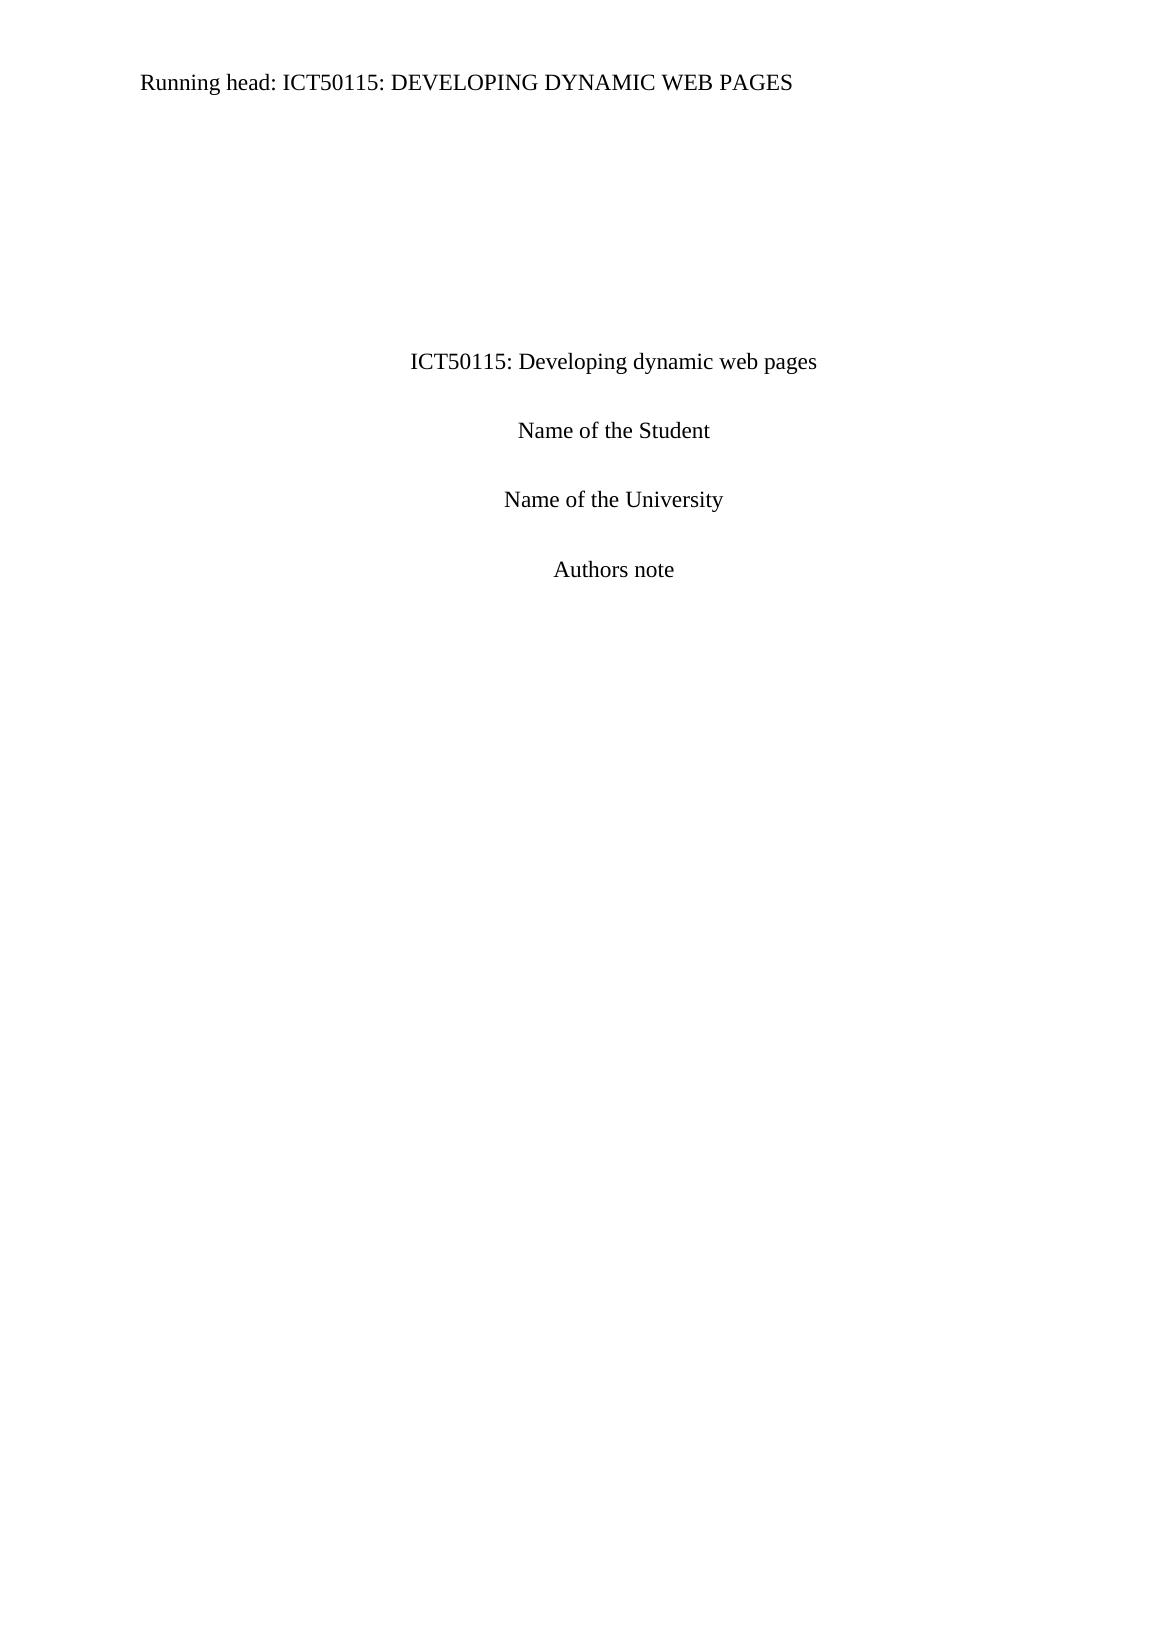 ICT50115: Developing Dynamic Web Pages_1